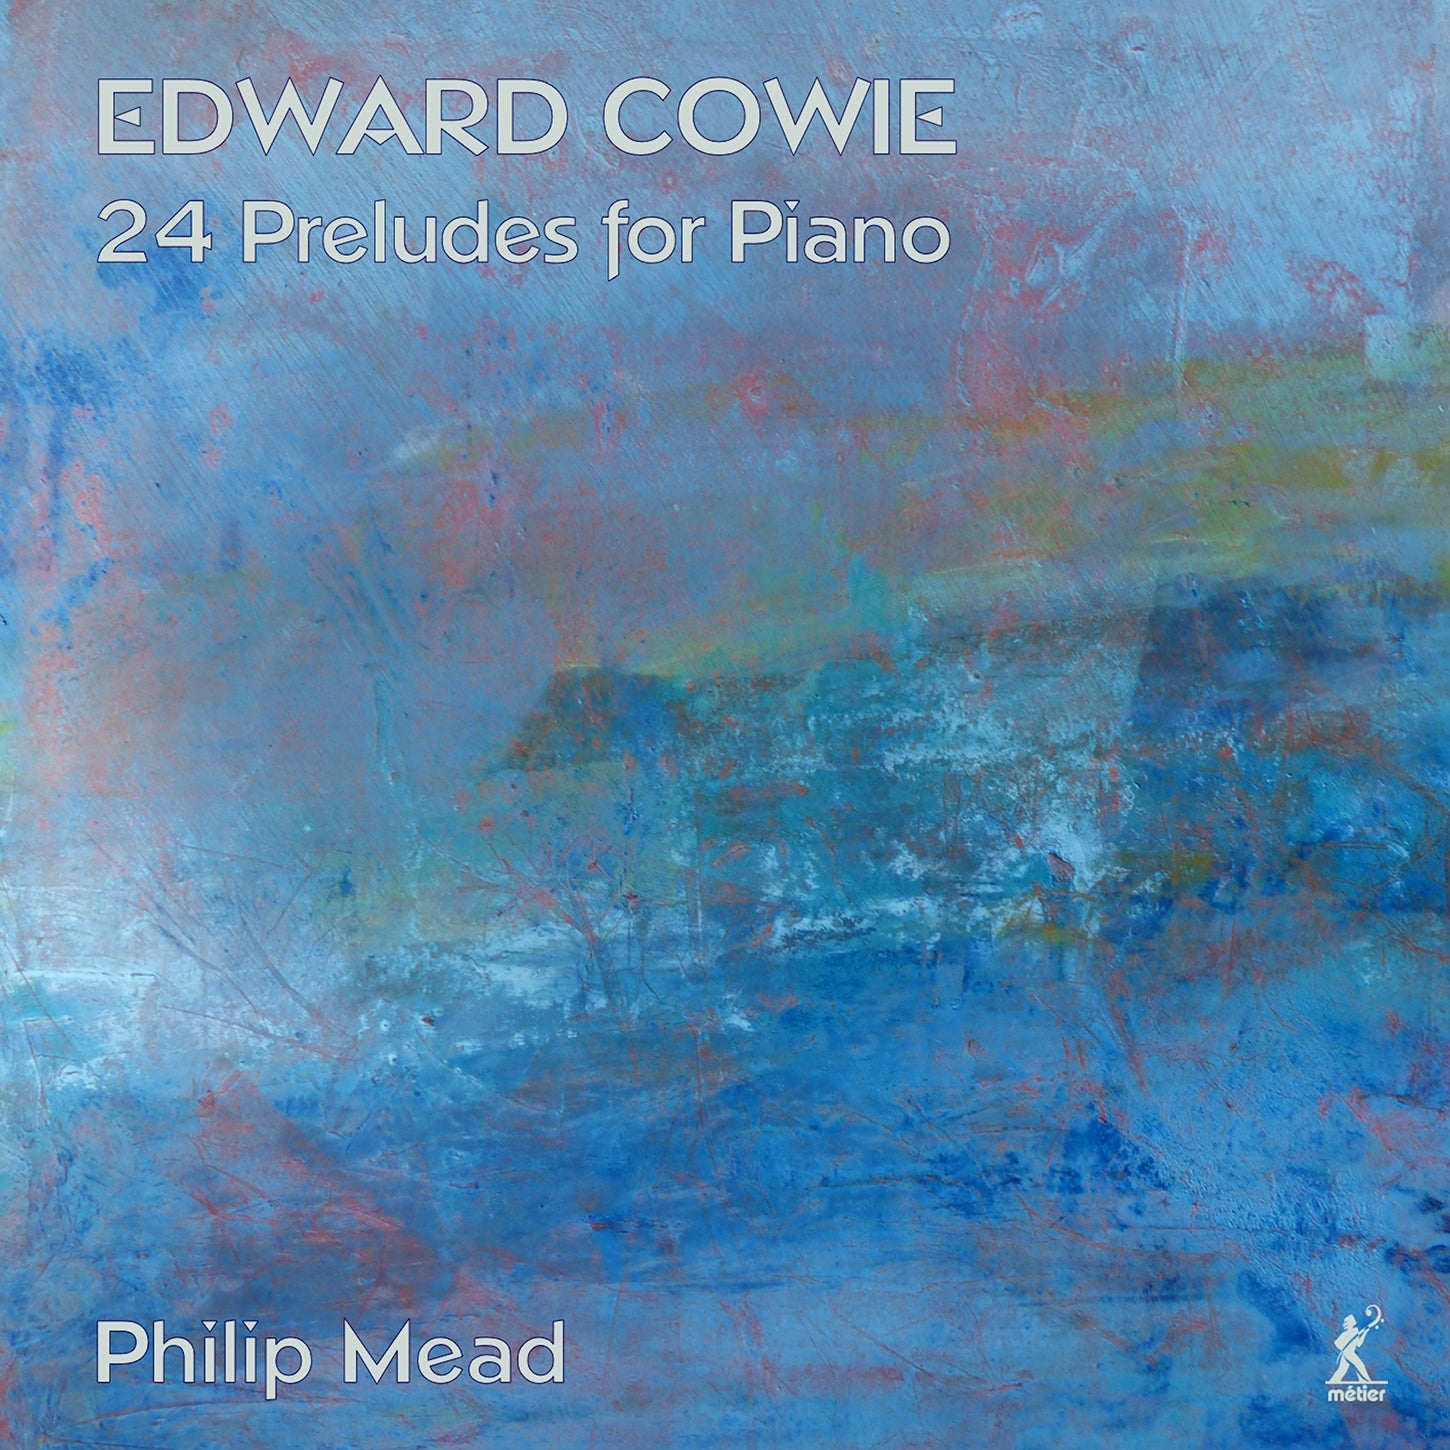 Cowie: 24 Preludes for Piano / Mead